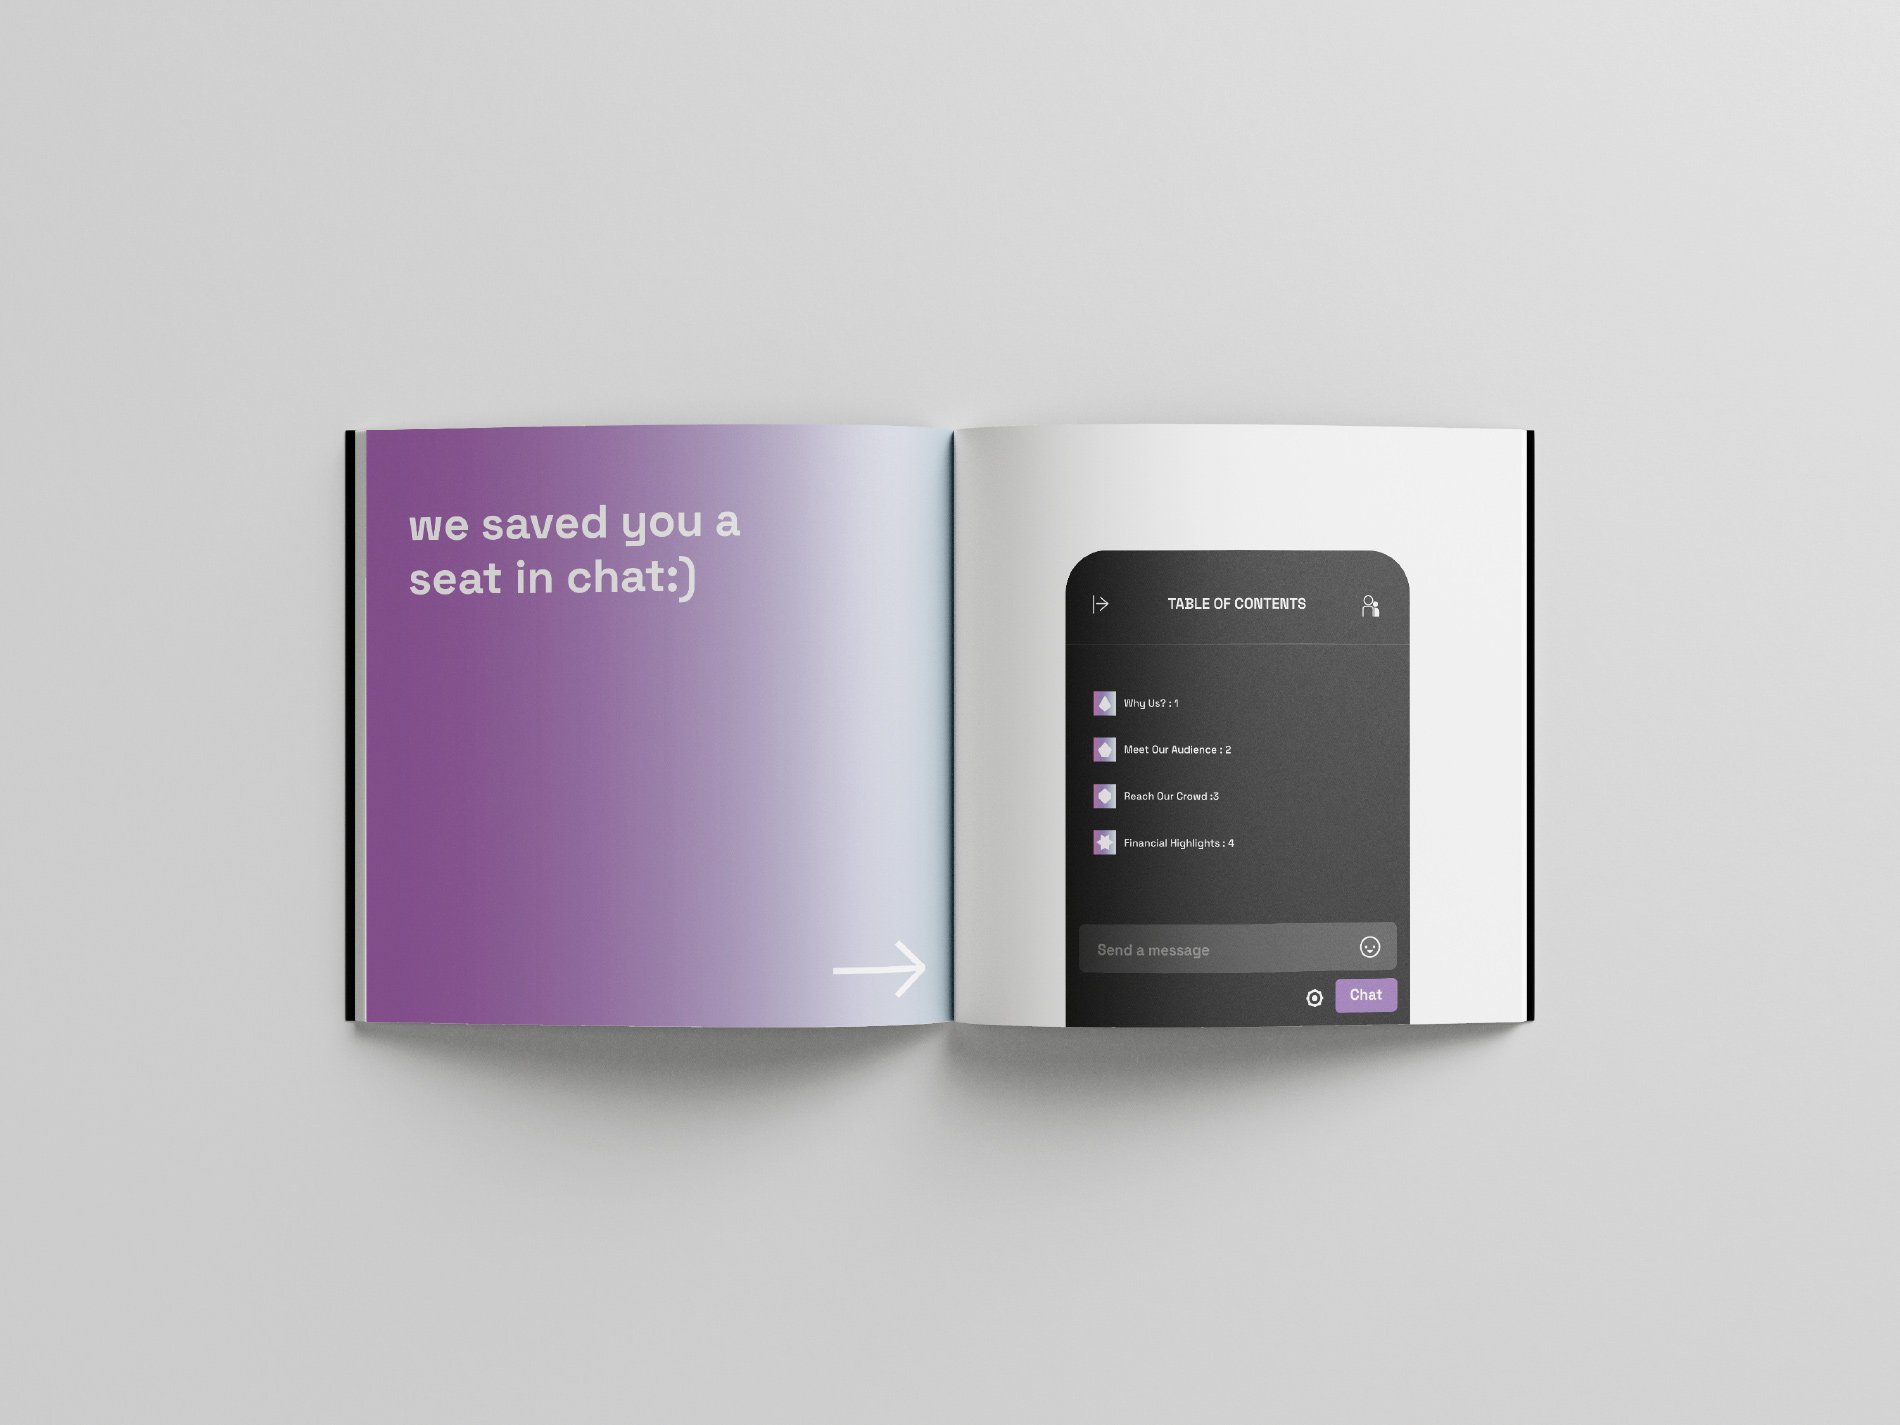 sol-yoon--twitch--annual-report--community-report--communication-design--information-design--advertising--design-in-business-and-marketing--capilano-university-idea-school-of-design-2.jpg